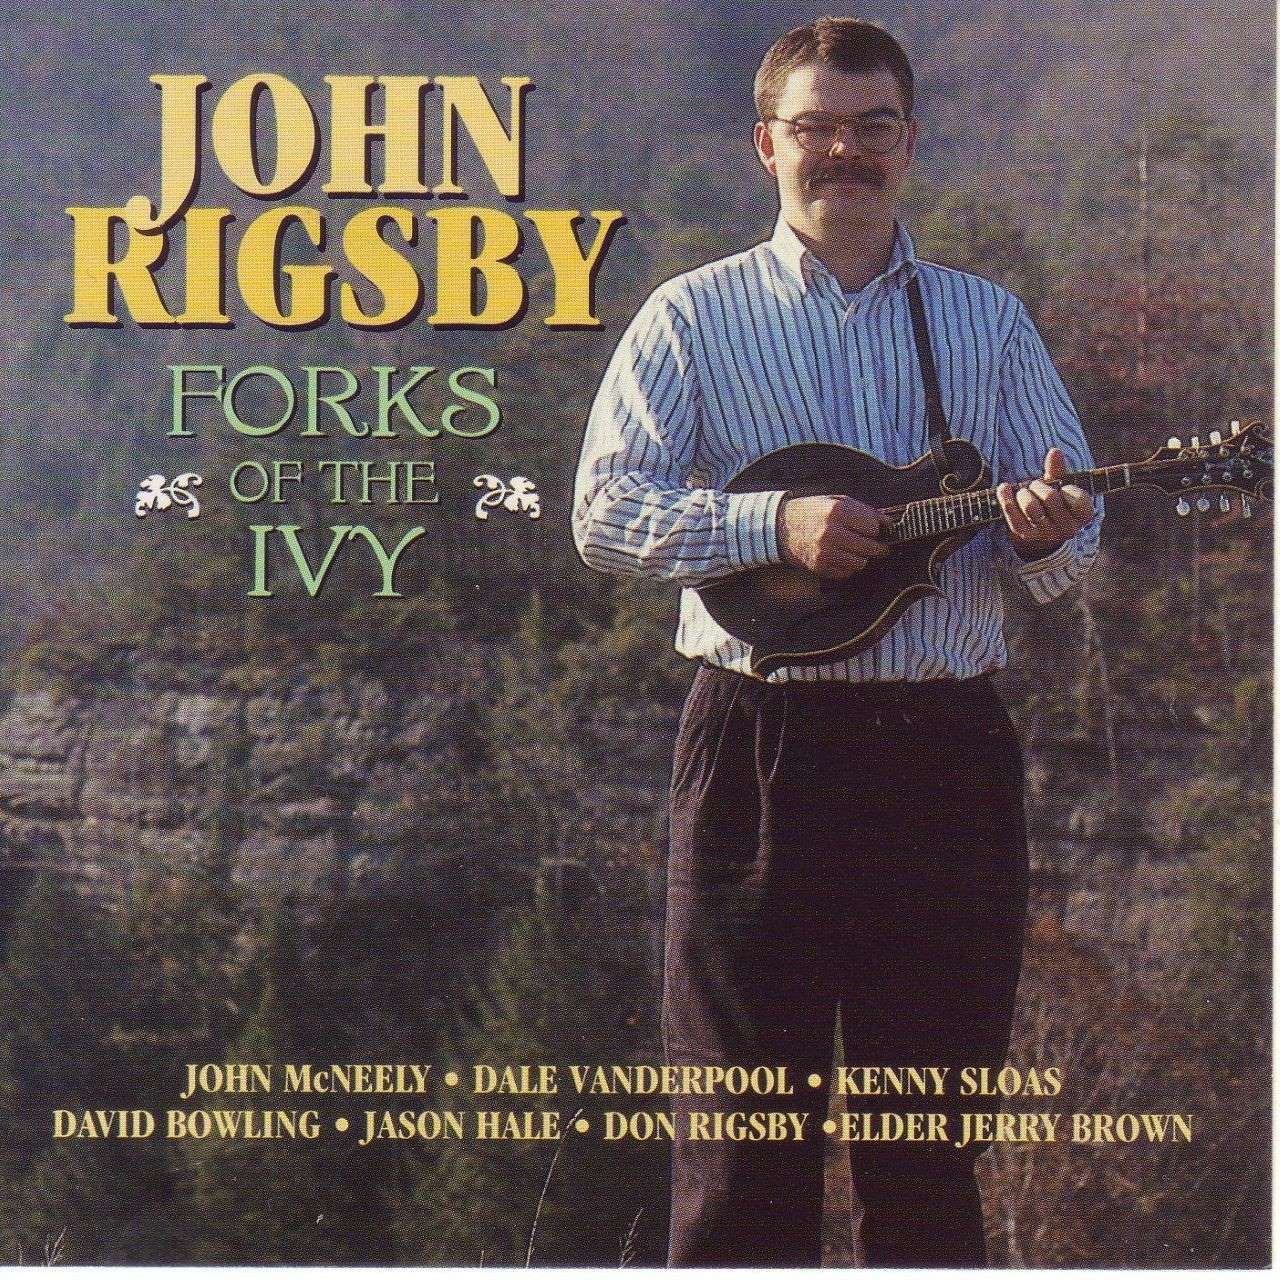 John Rigsby - Forks Of The Ivy cover album